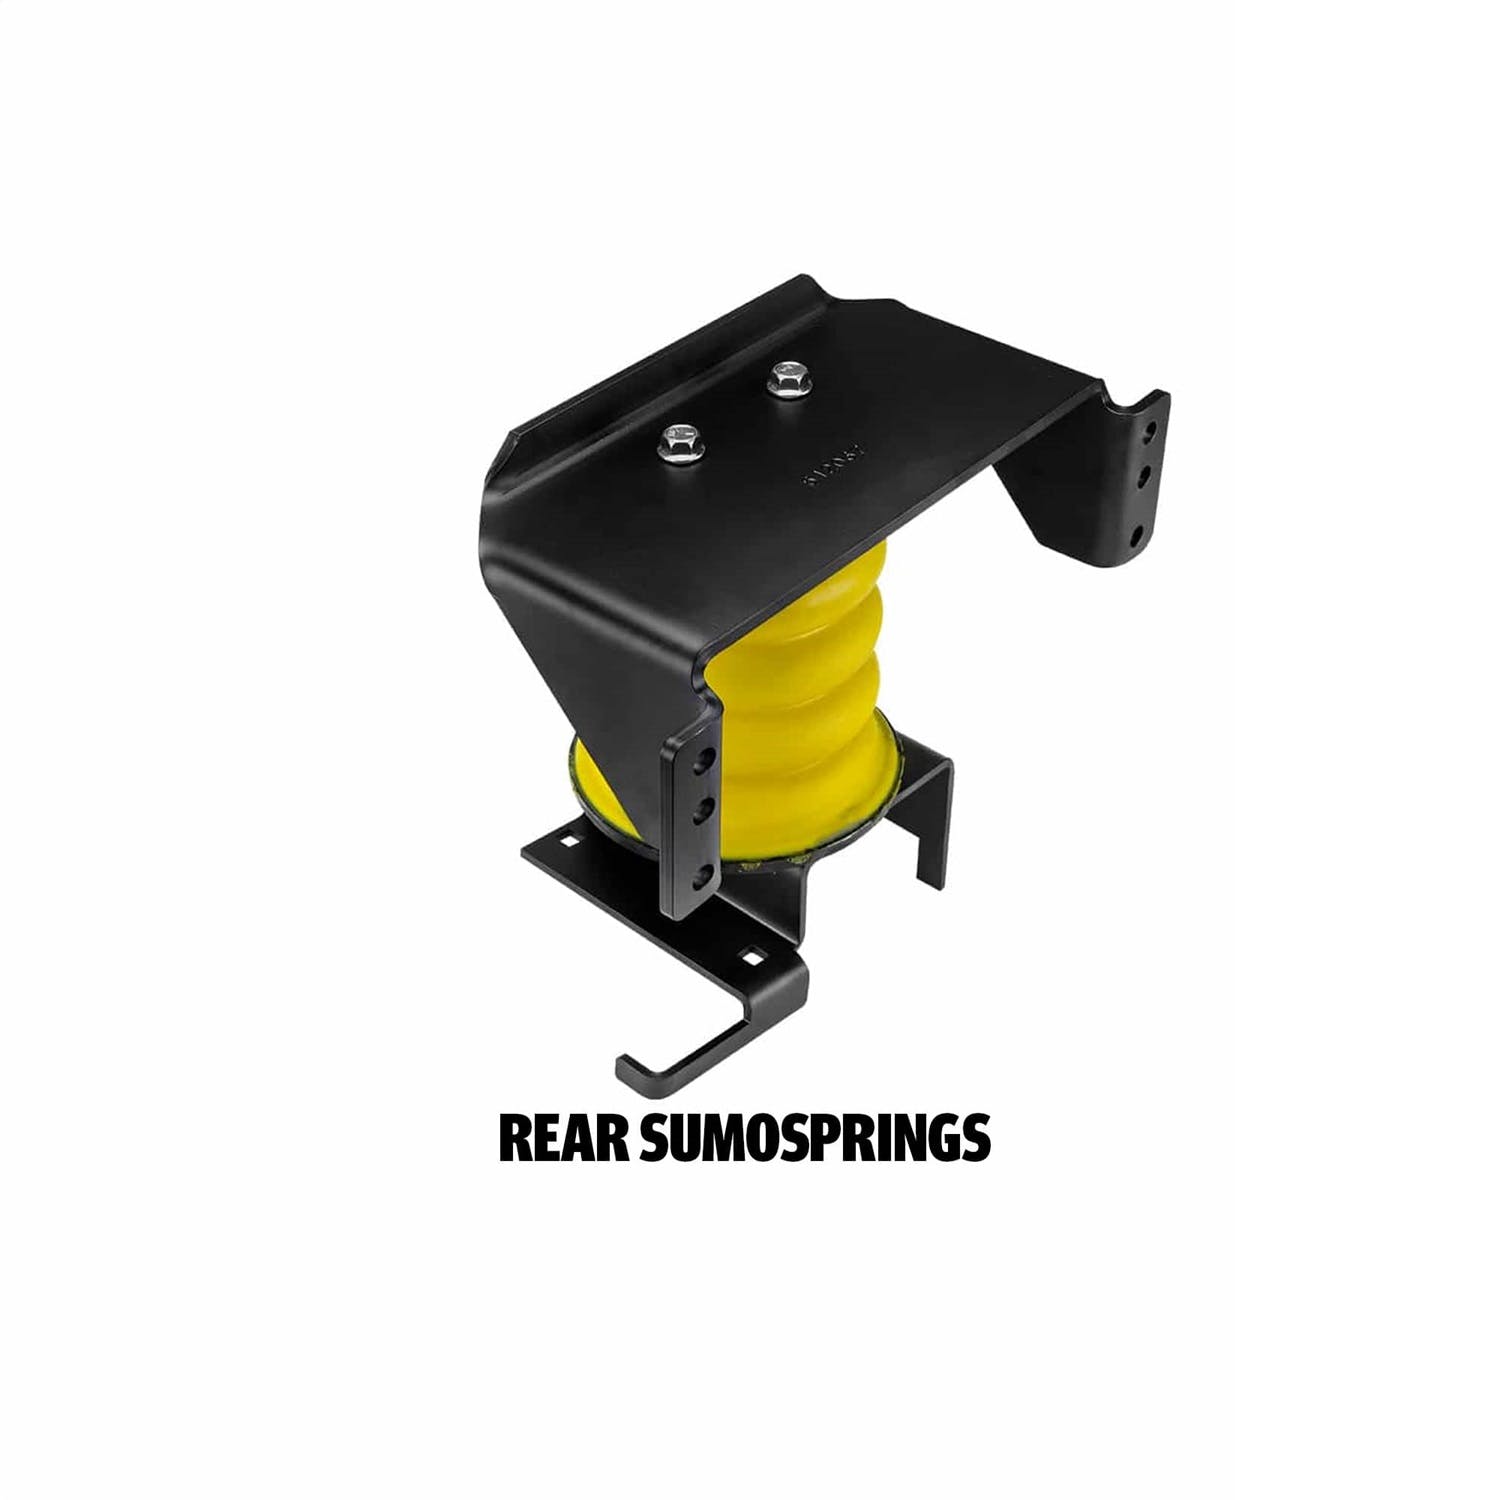 SuperSprings K-10-004 SumoSprings Front and Rear Kits are one-piece units attached on each side